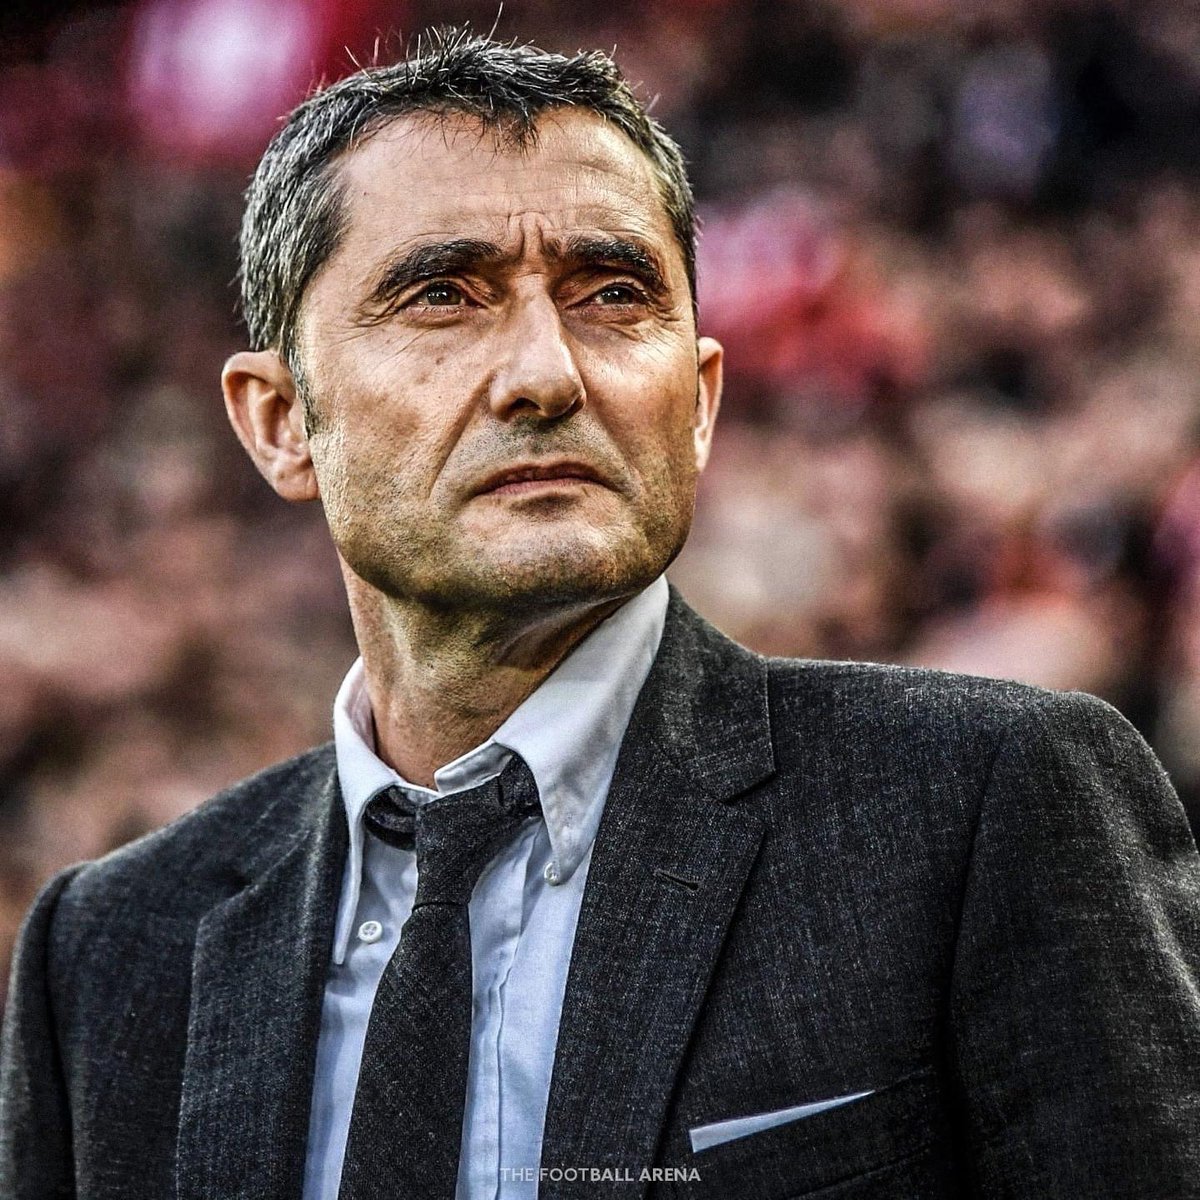 ❗A reminder that Ernesto Valverde lost only 7 league games in 3 years with Barcelona as a Manager.